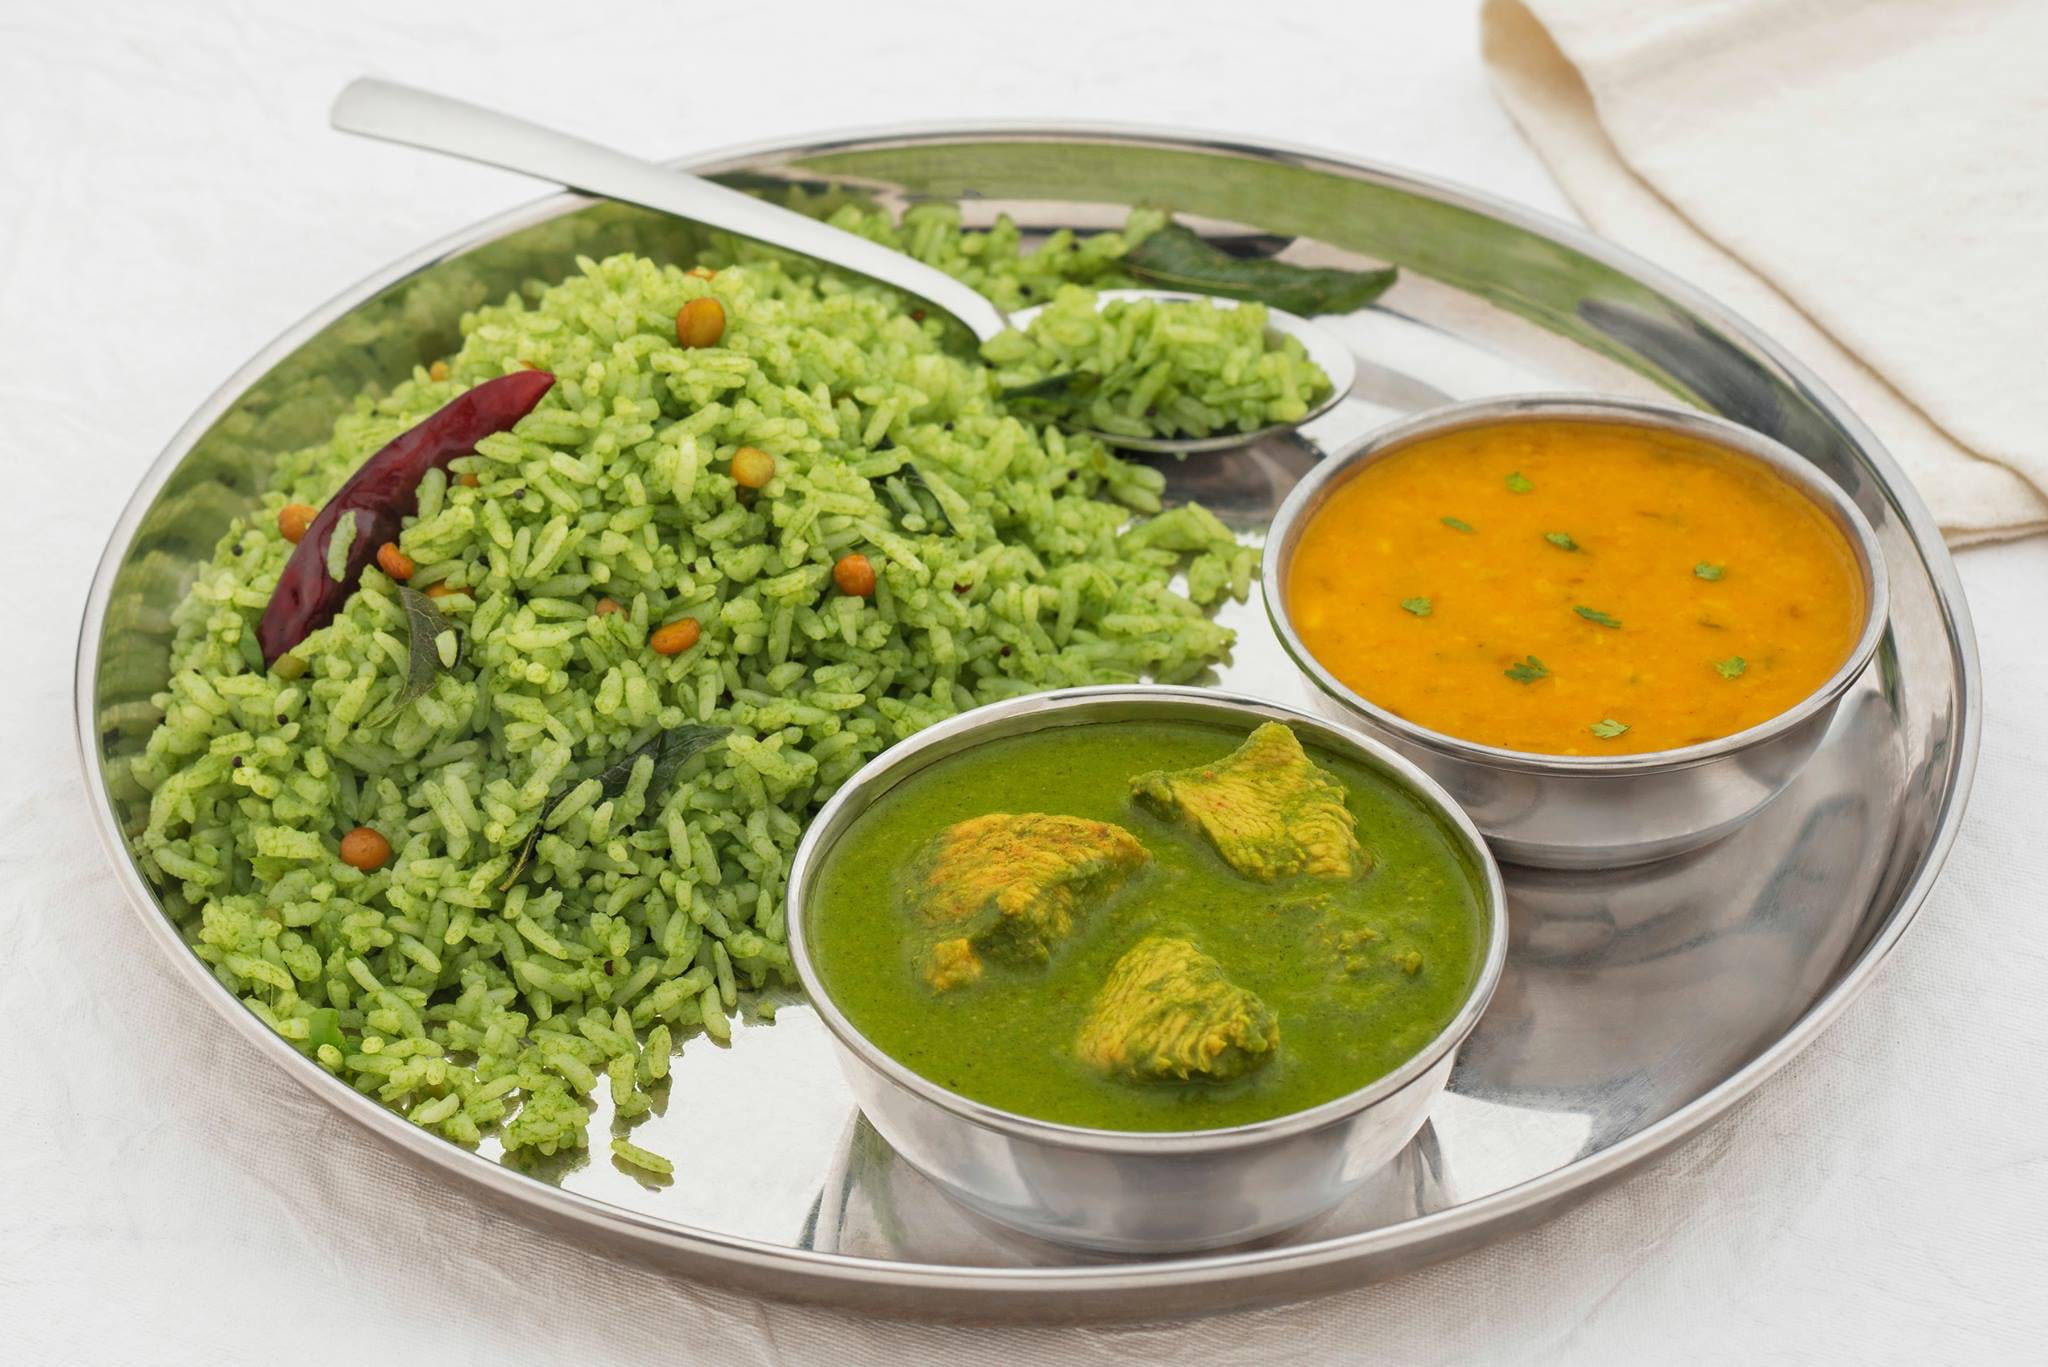 Food,Cuisine,Dish,Ingredient,Produce,Vegetarian food,Indian cuisine,Meal,Lunch,Avial